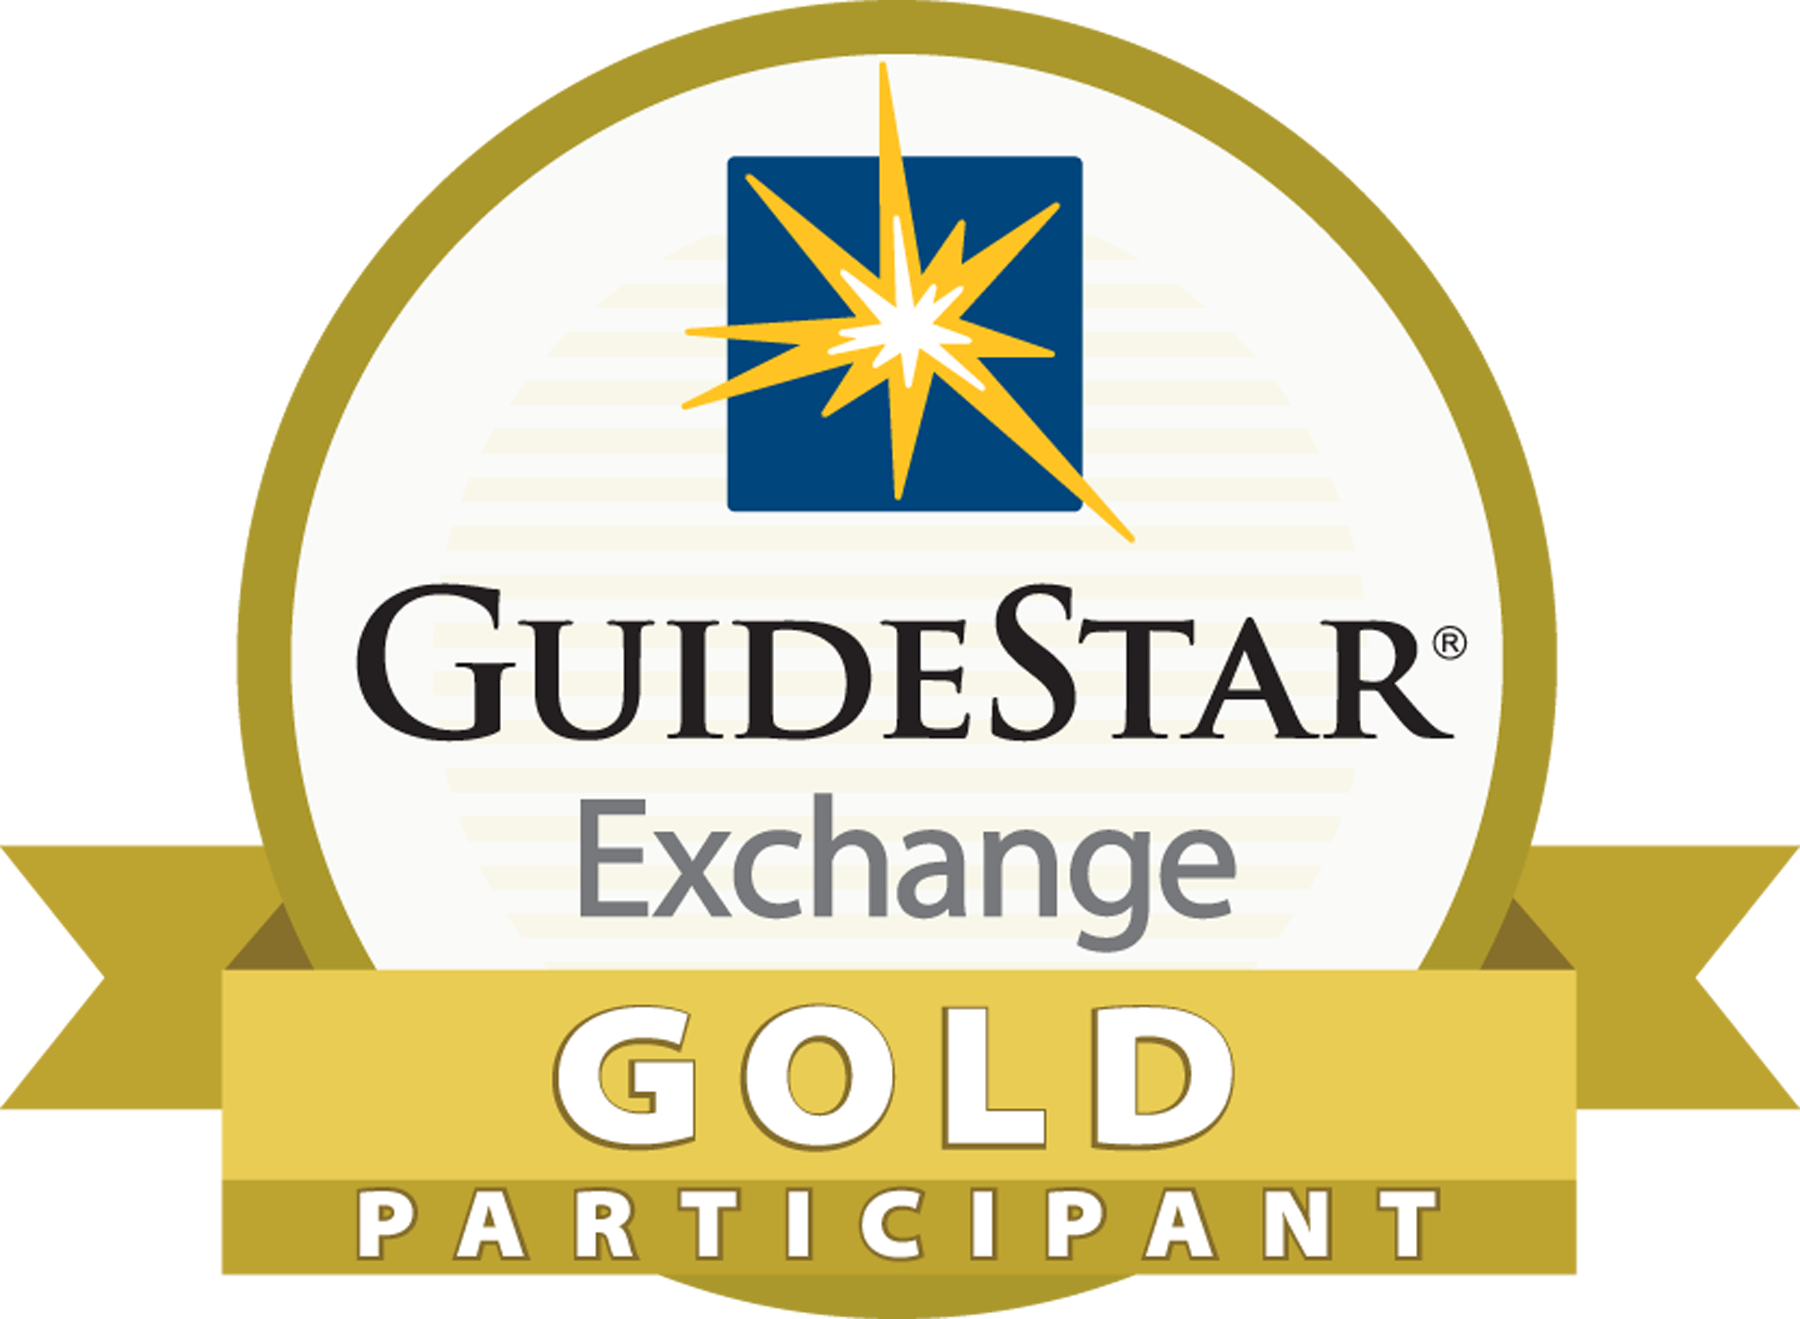 Guide Star Exchange - Gold Participant